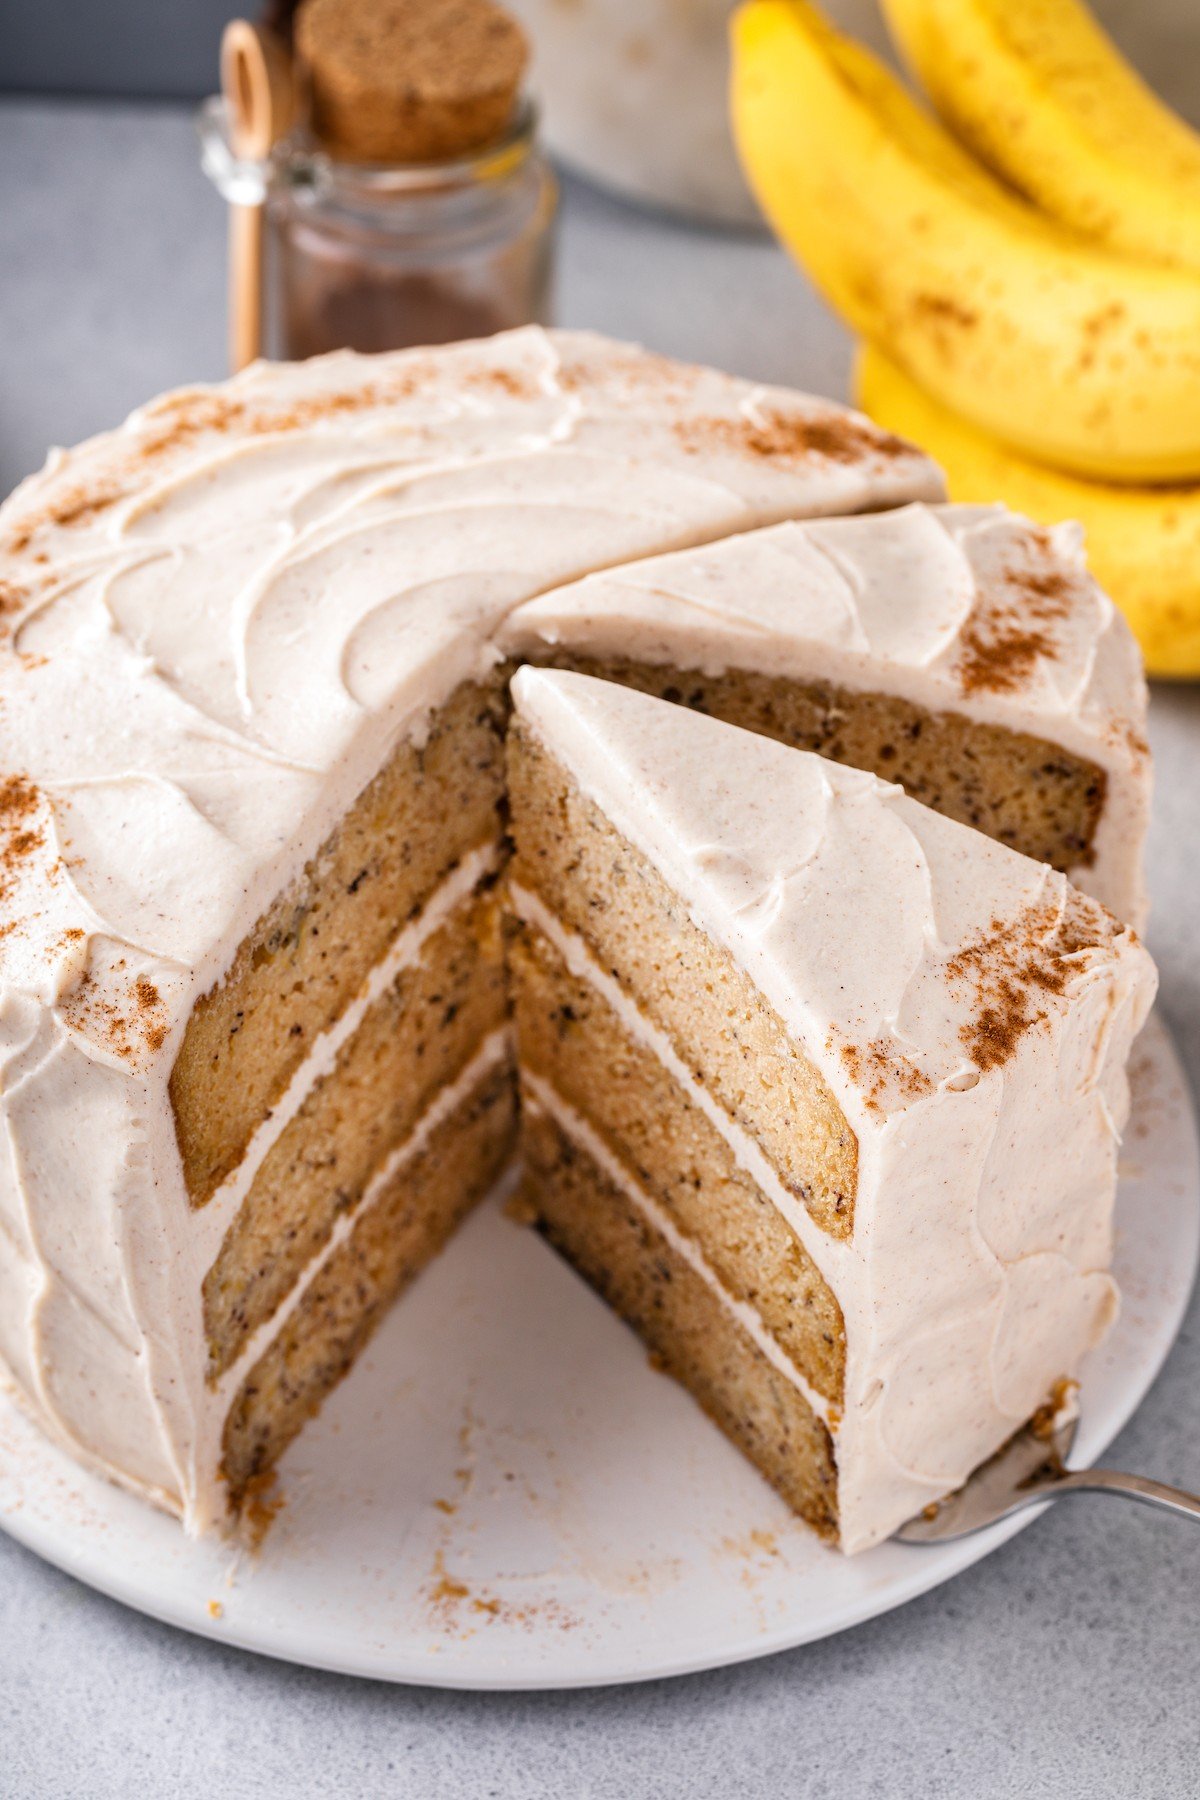 The BEST Banana Cake Recipe with Cream Cheese Frosting